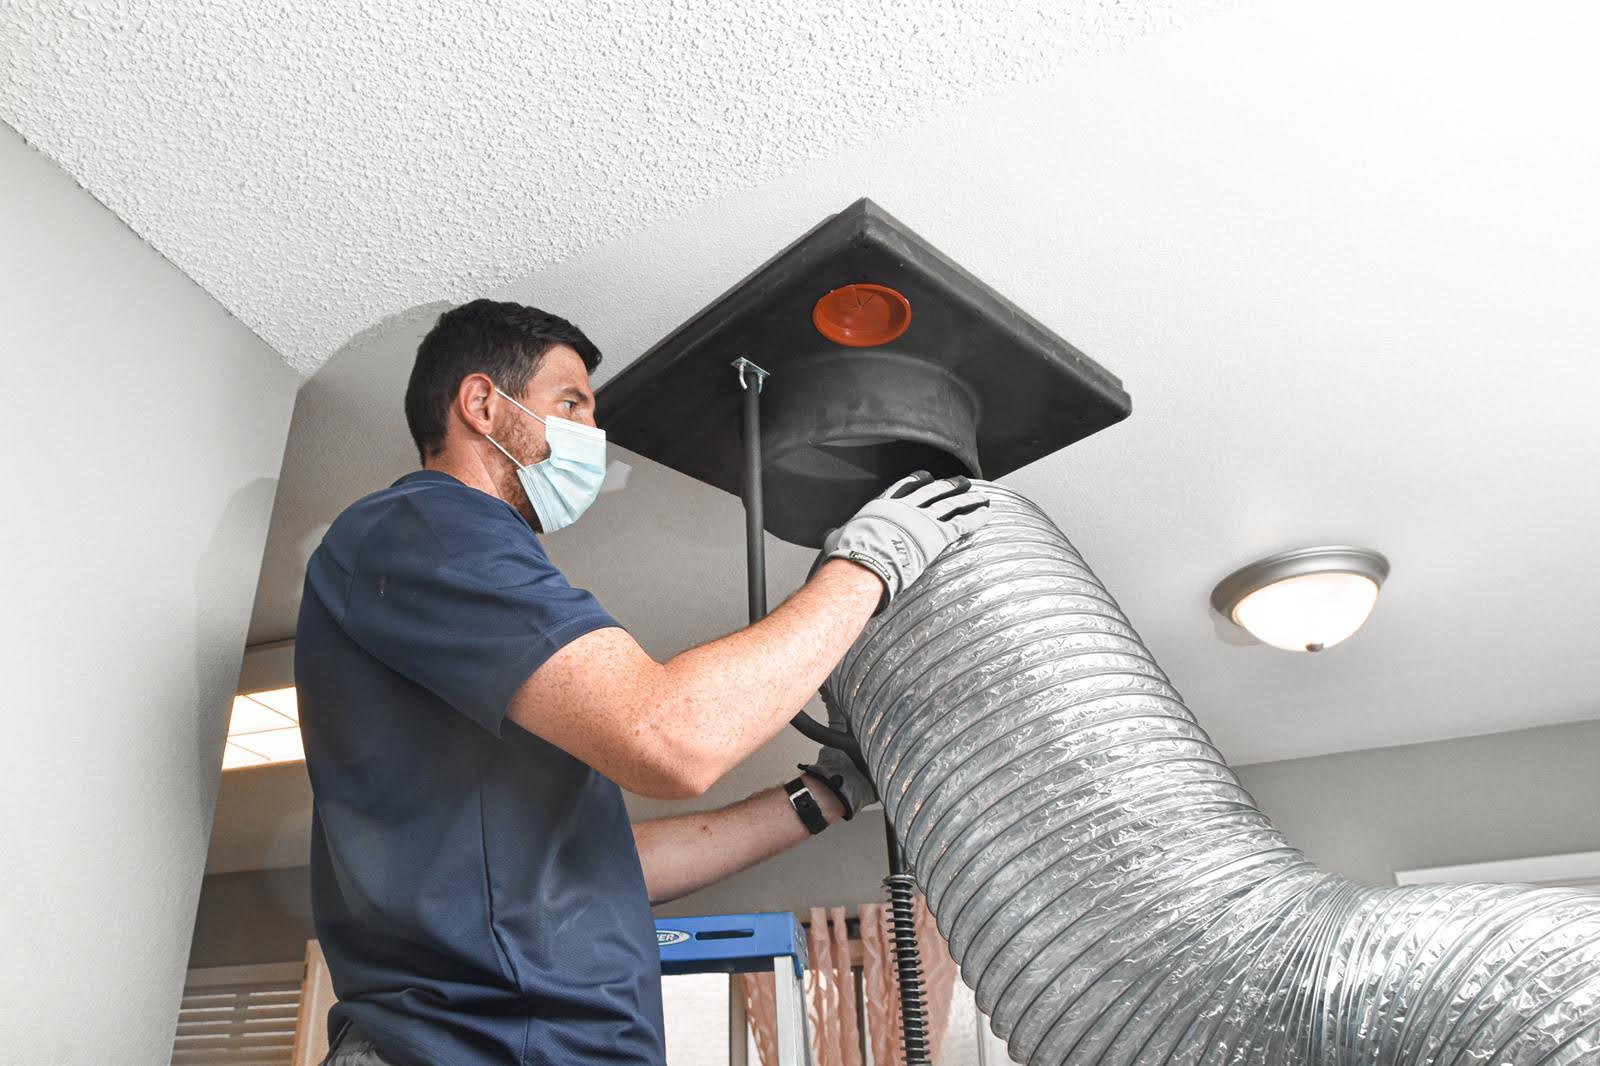 Negative air prevents dirt/dust/debris from ending up in your home.